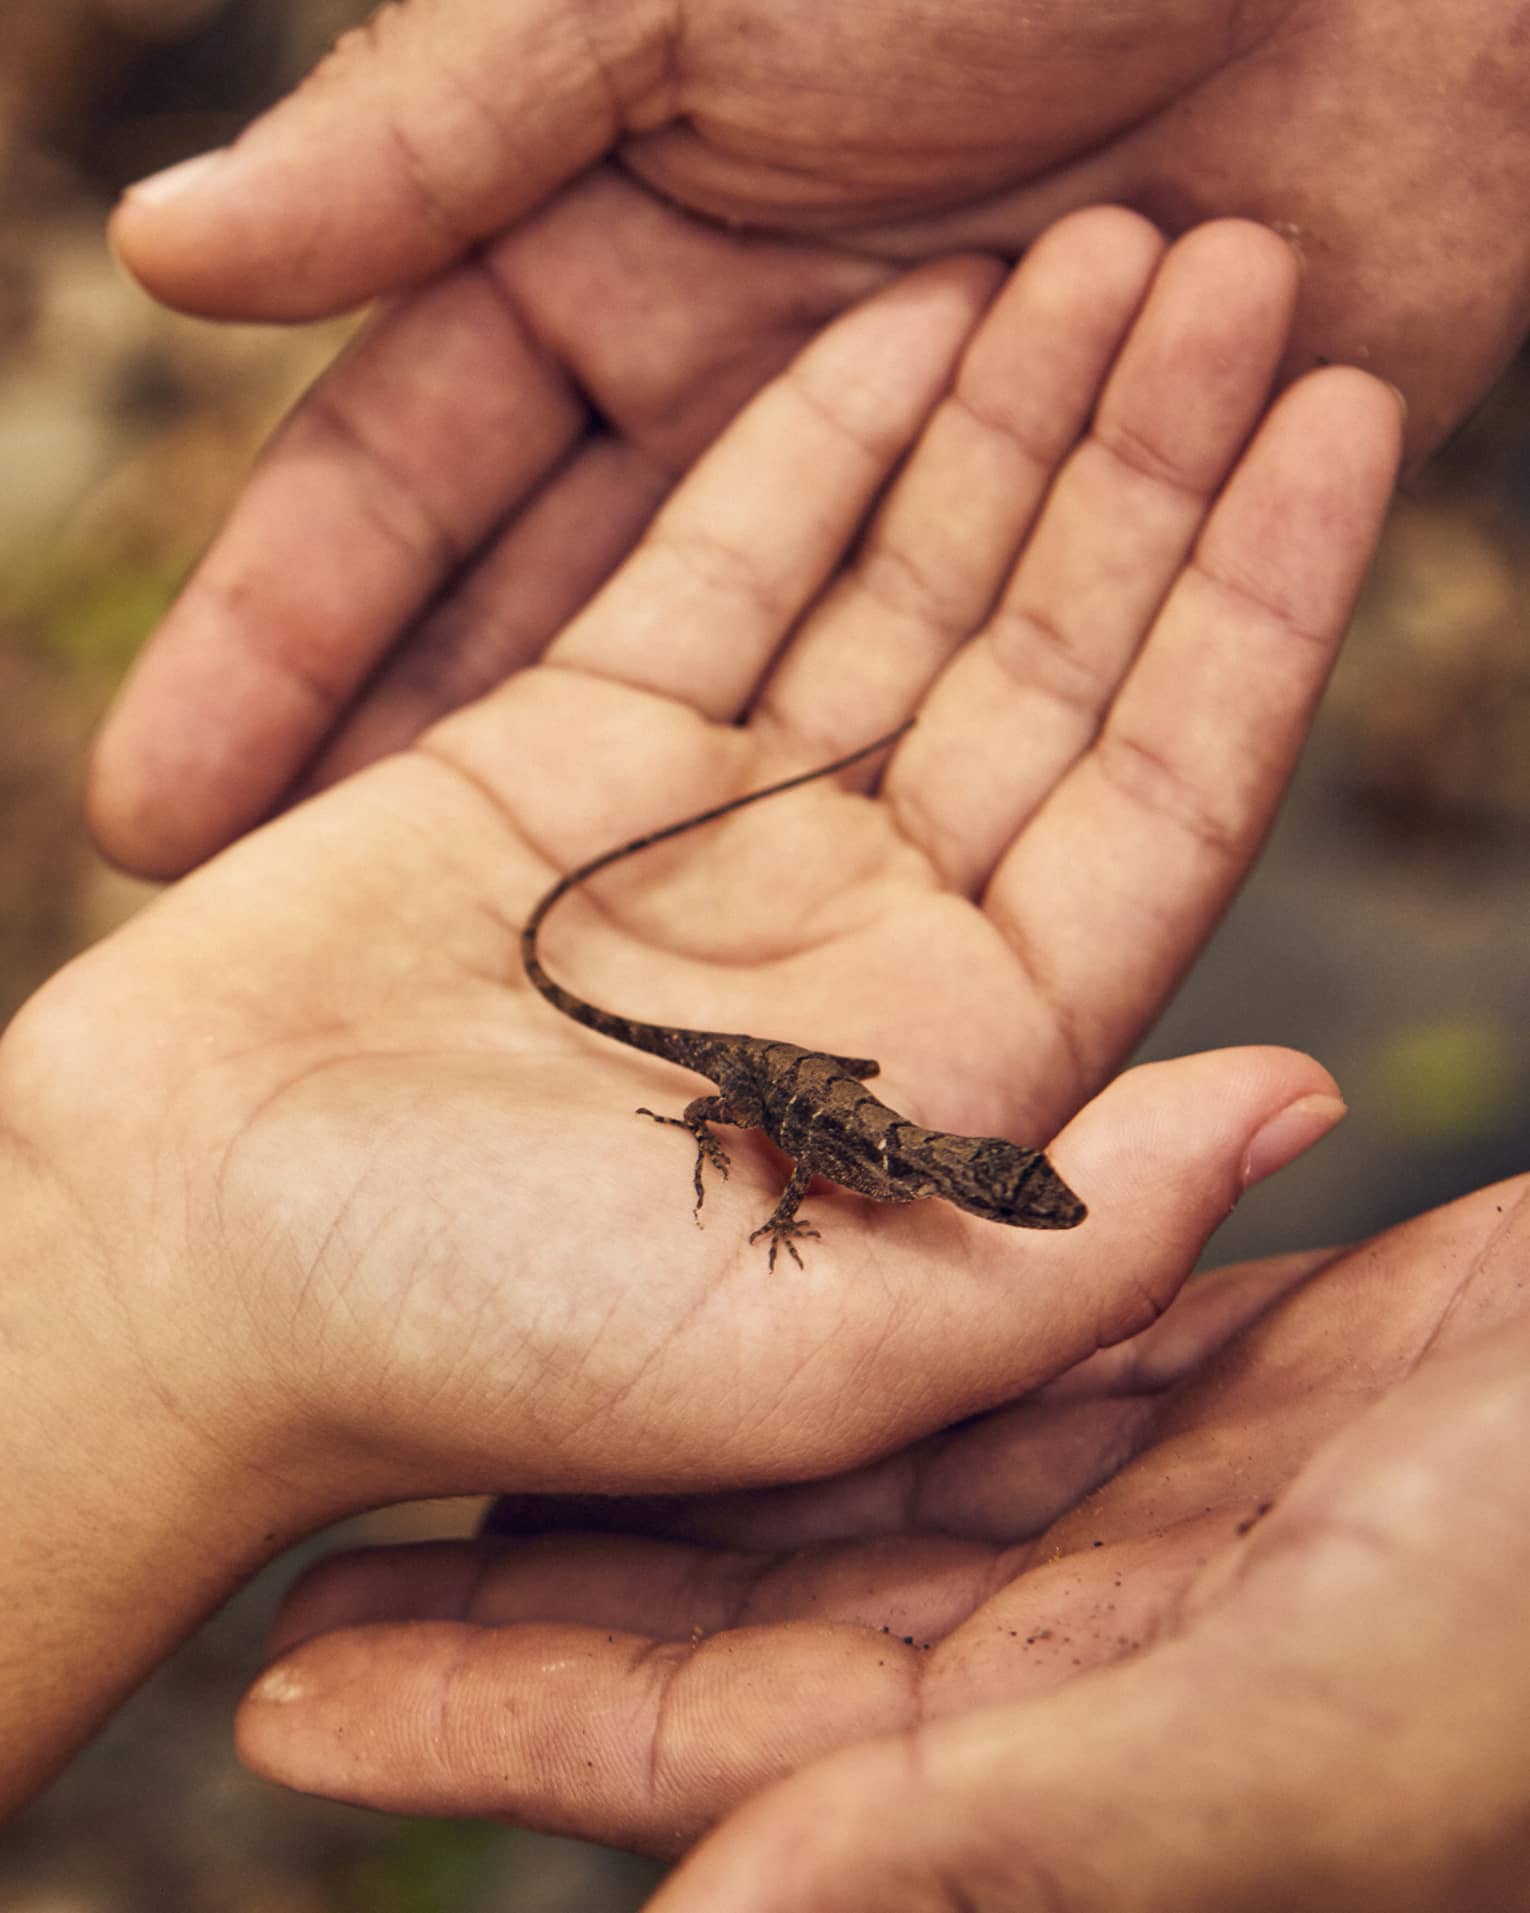 Close up of a small brown-and-black lizard being held in the palm of someones hand